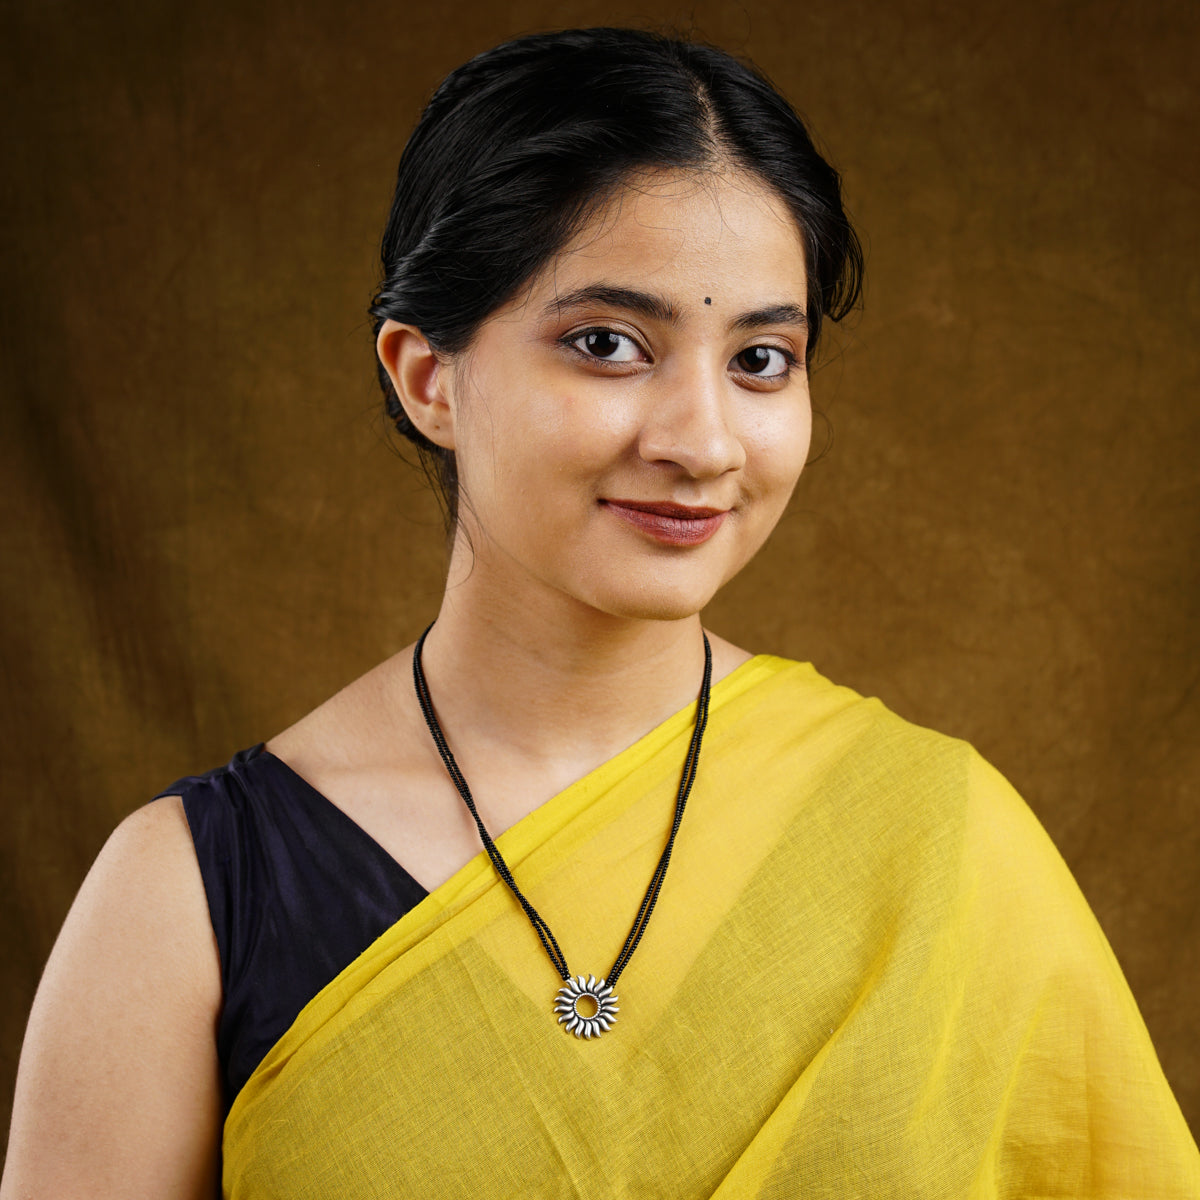 a woman wearing a yellow sari and a necklace